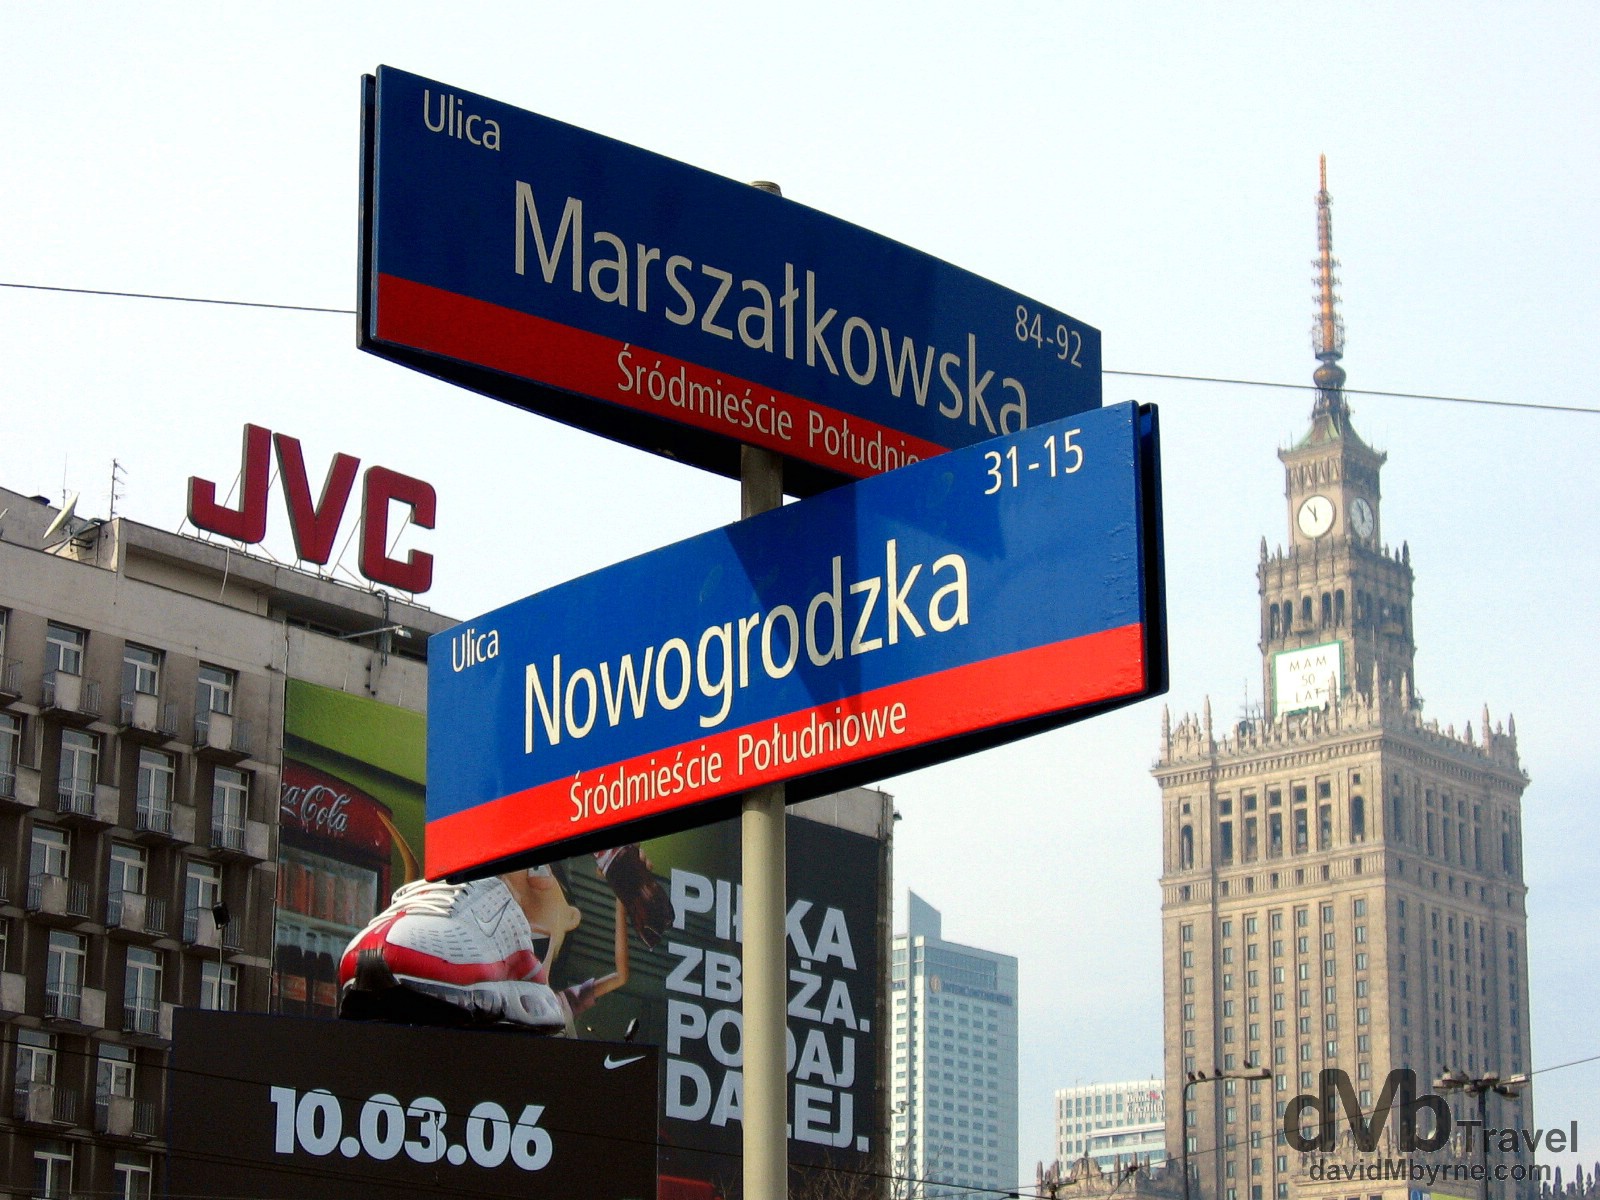 Street signage & the massive tower of the Palace of Culture & Science building as seen from outside Centrum Metro Station in Warsaw, Poland. March 5, 2006.